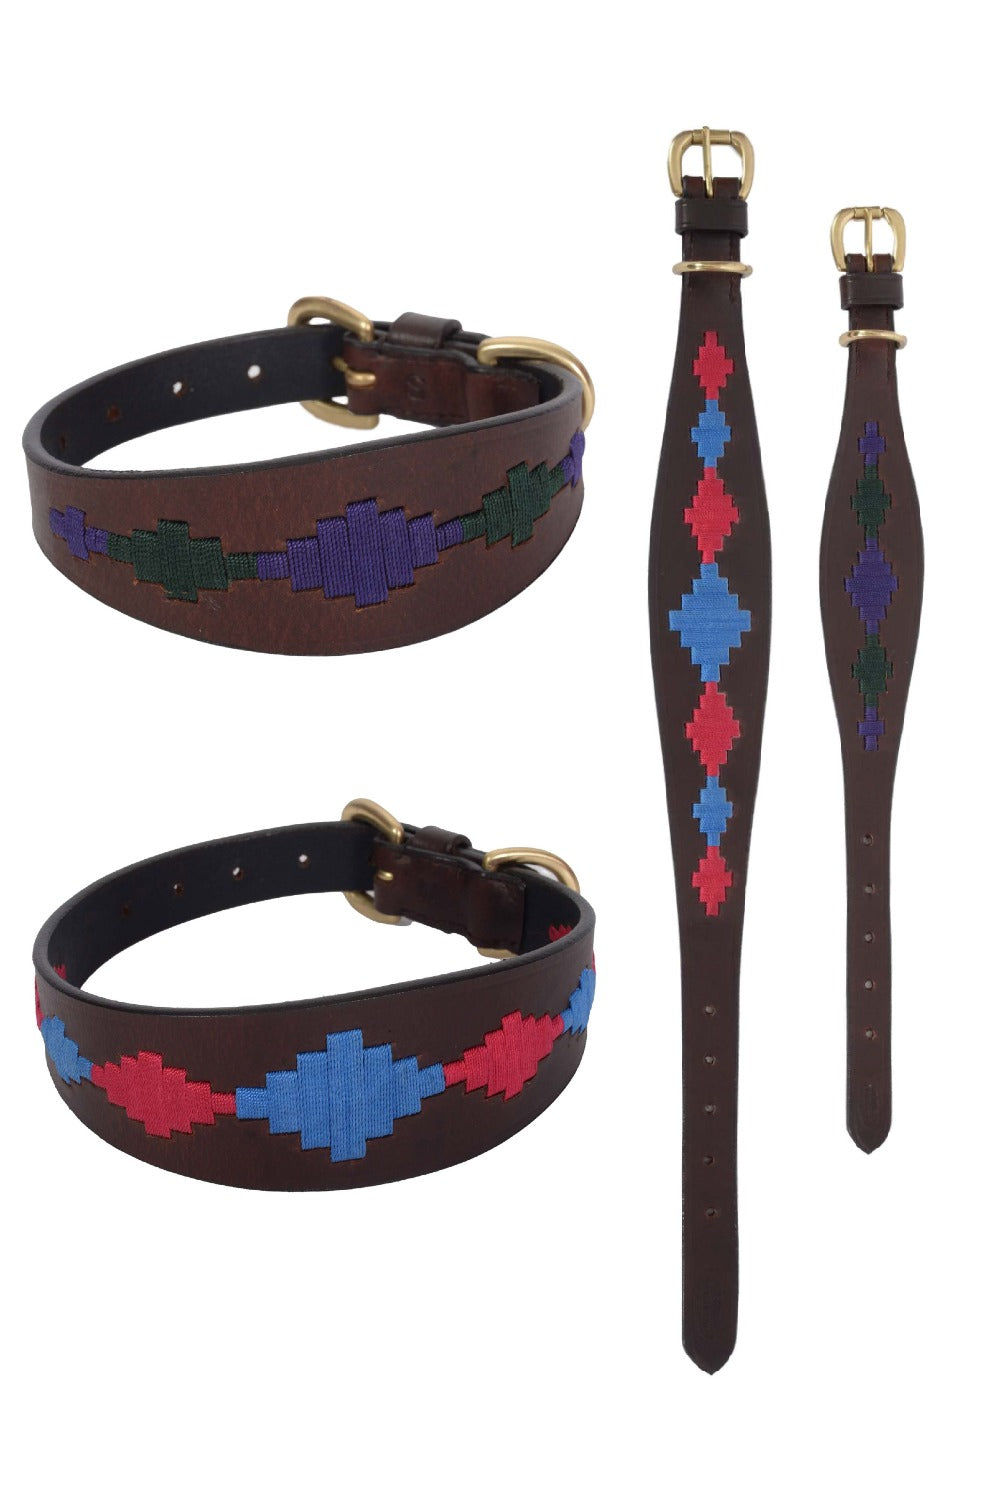 WeatherBeeta Lurcher Polo Leather Dog Collar in Beaufort Brown/Pink/Blue, Beaufort Brown/Purple/Teal